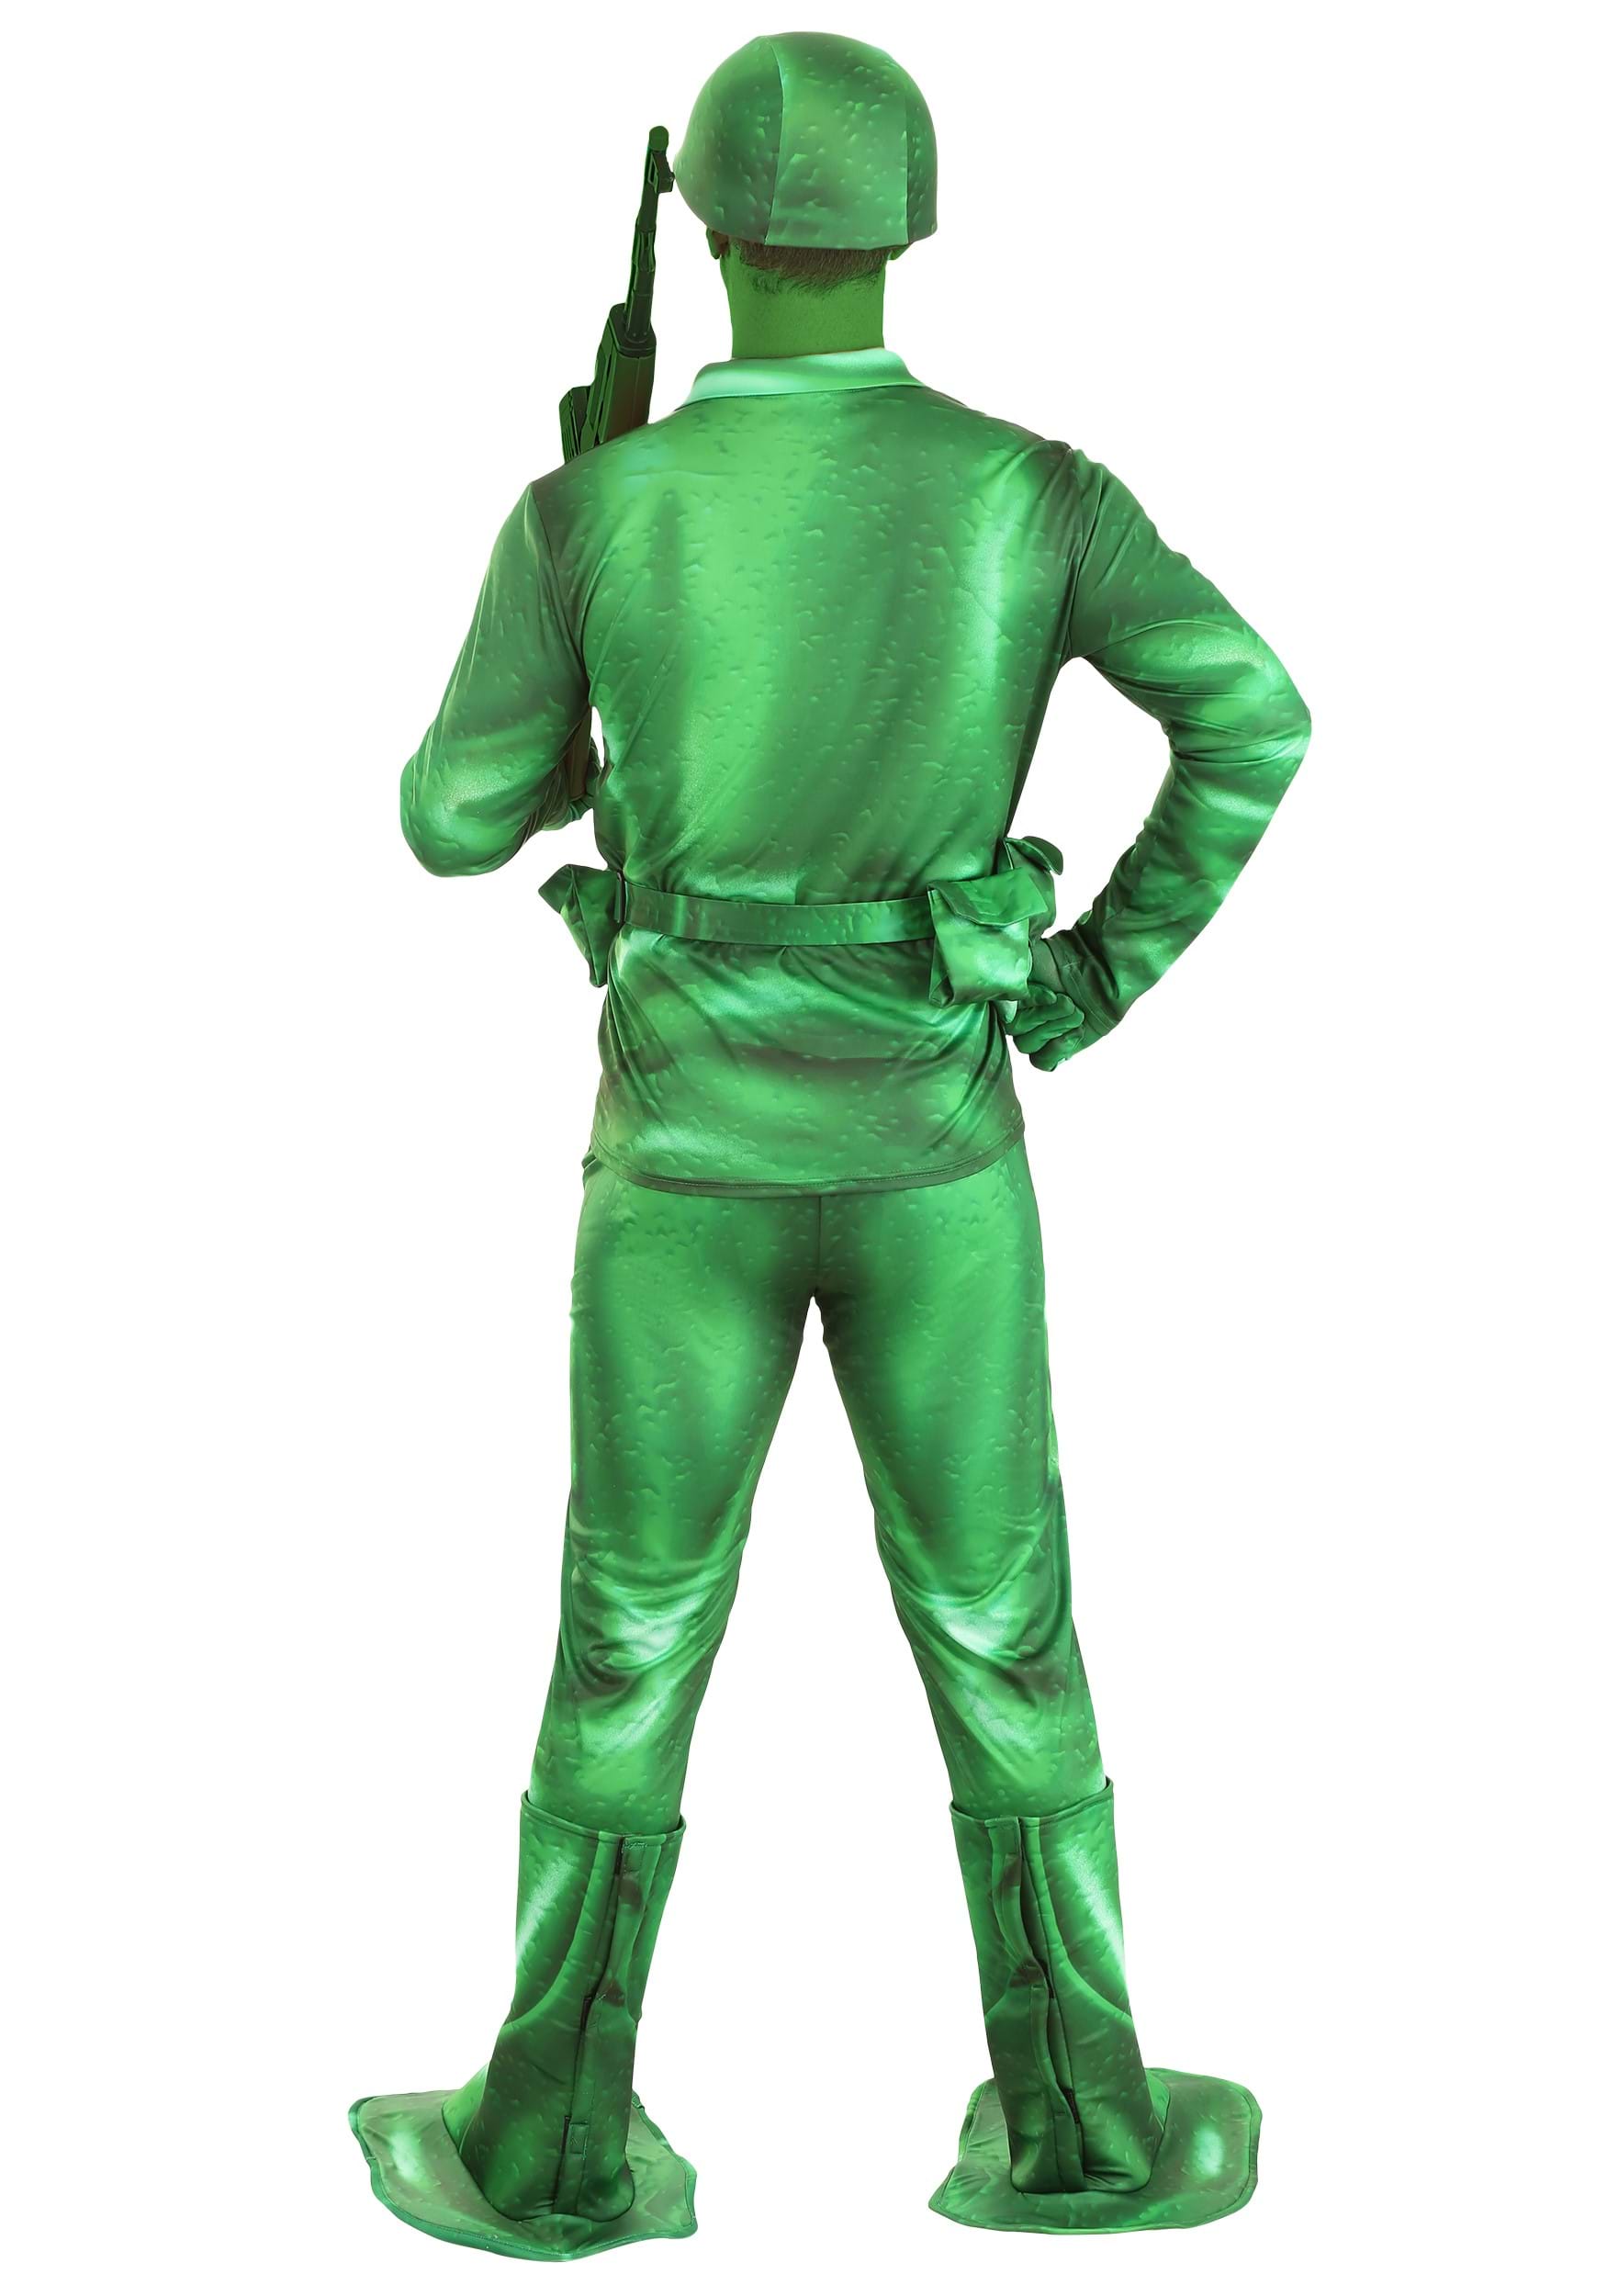 Plastic Green Army Man Costume for Adults